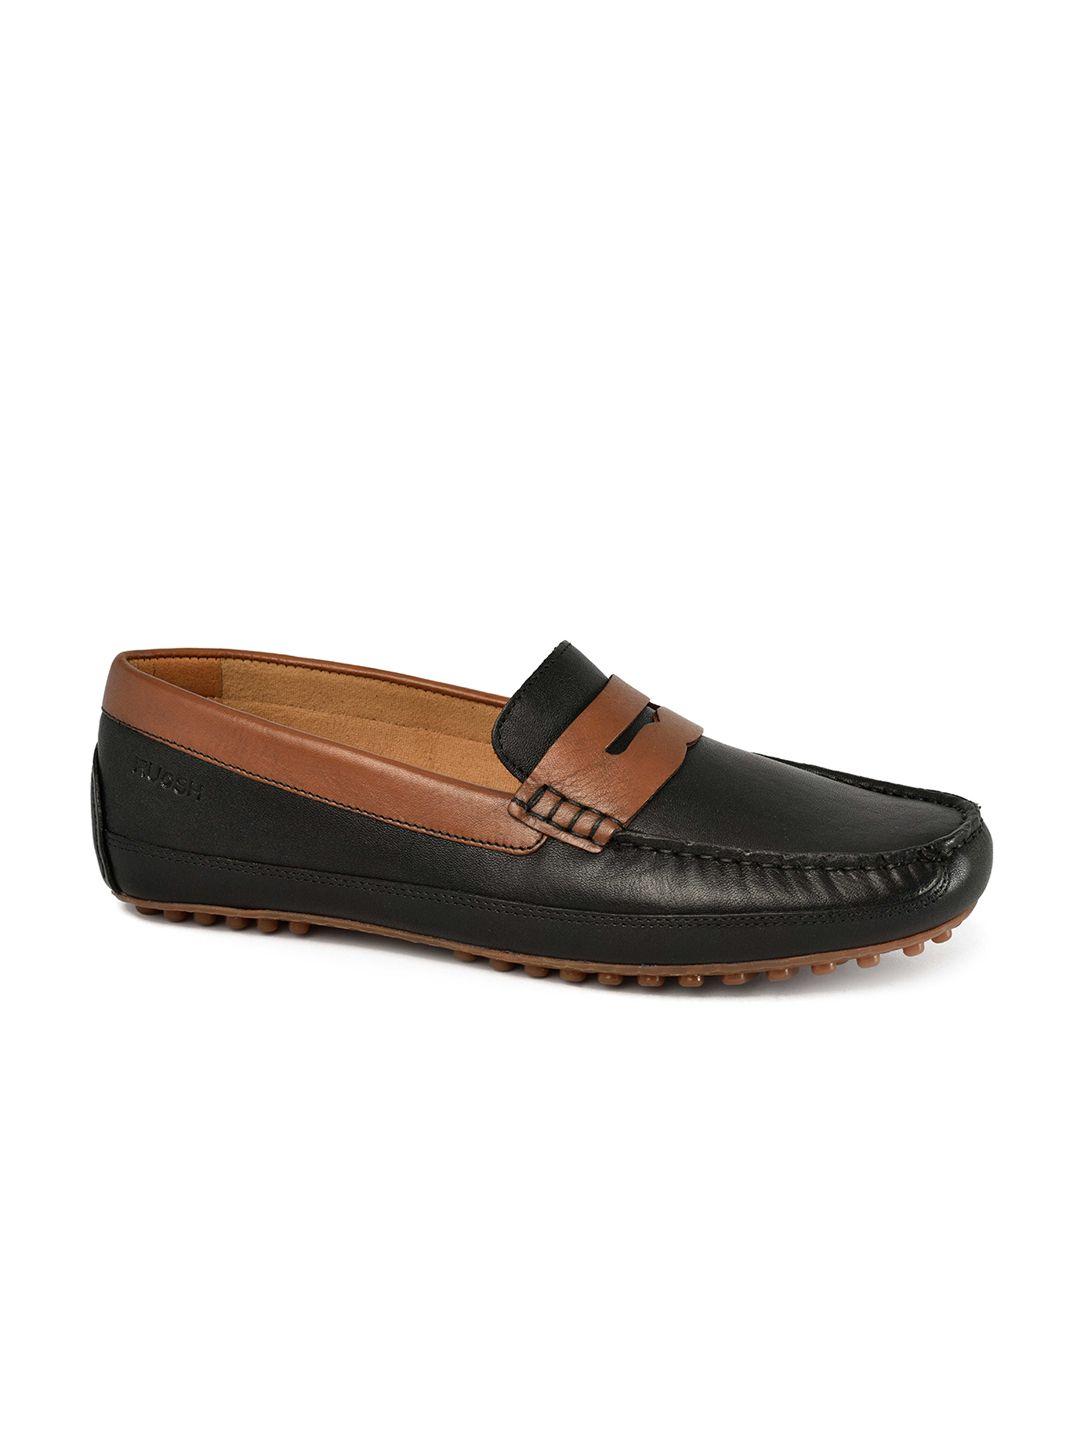 ruosh-men-comfort-insole-penny-loafers